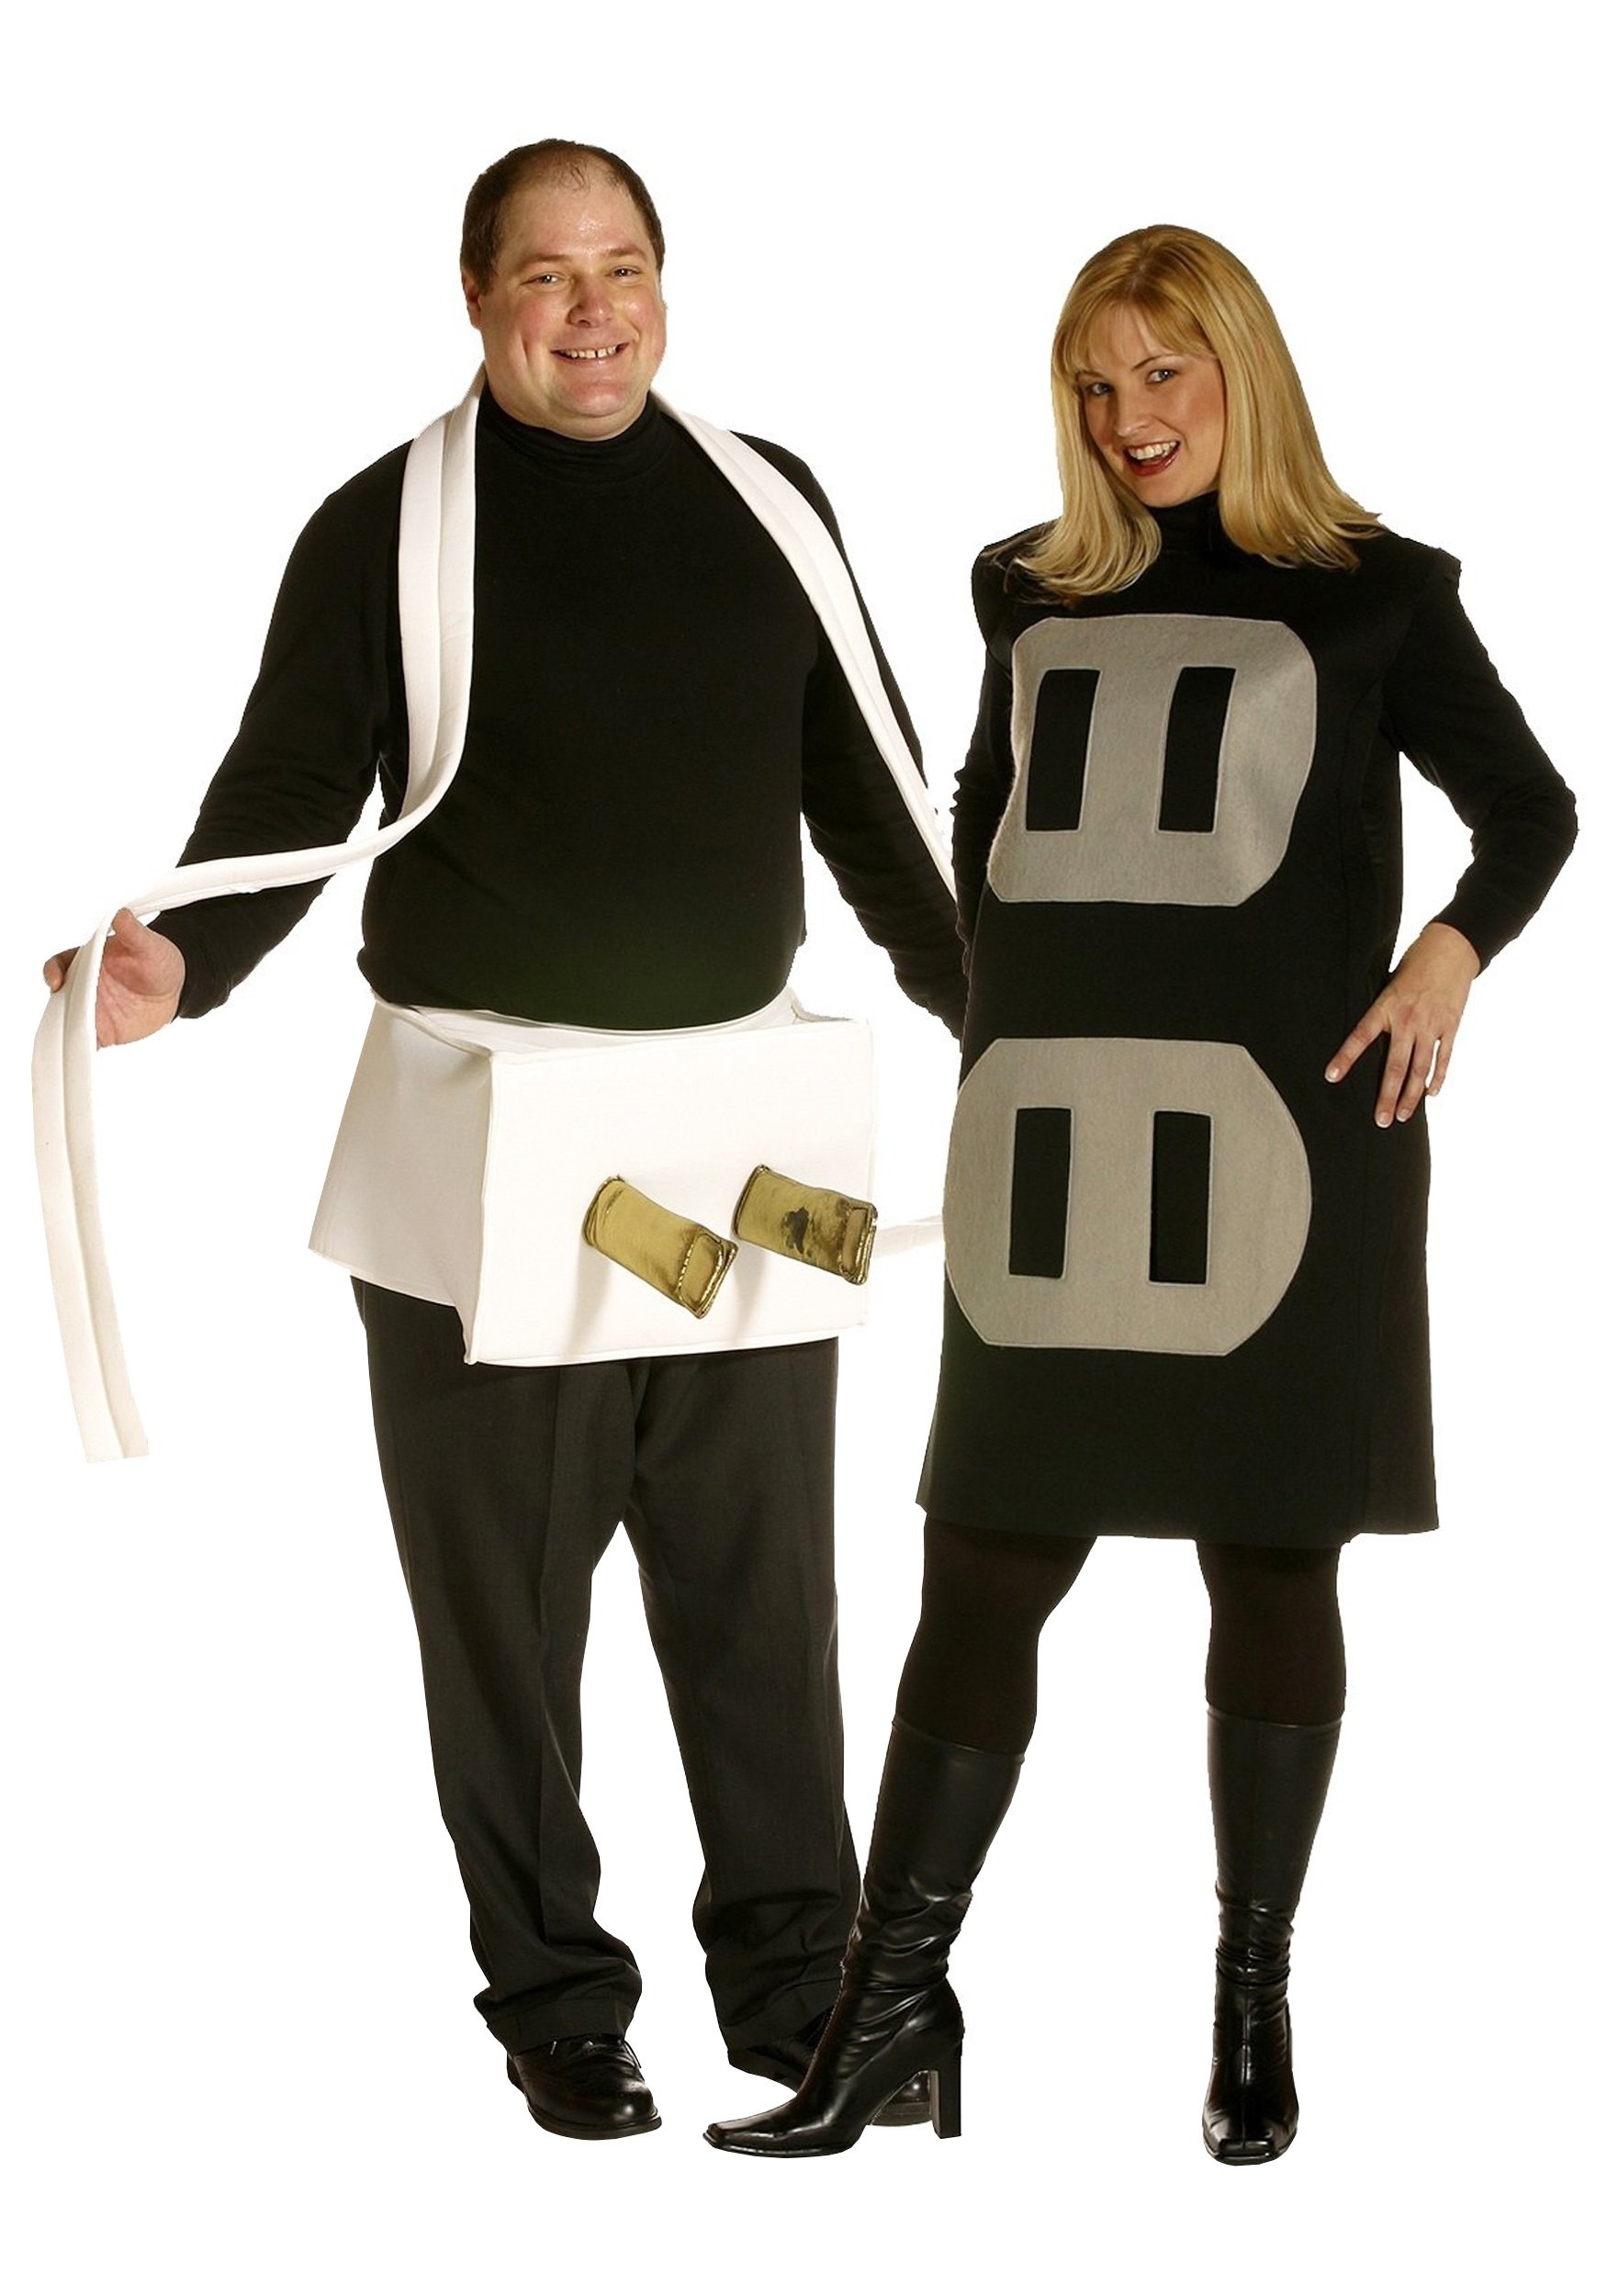 10 Most Recommended Adult Unique Halloween Costume Ideas plus size plug and socket costume 6 2022